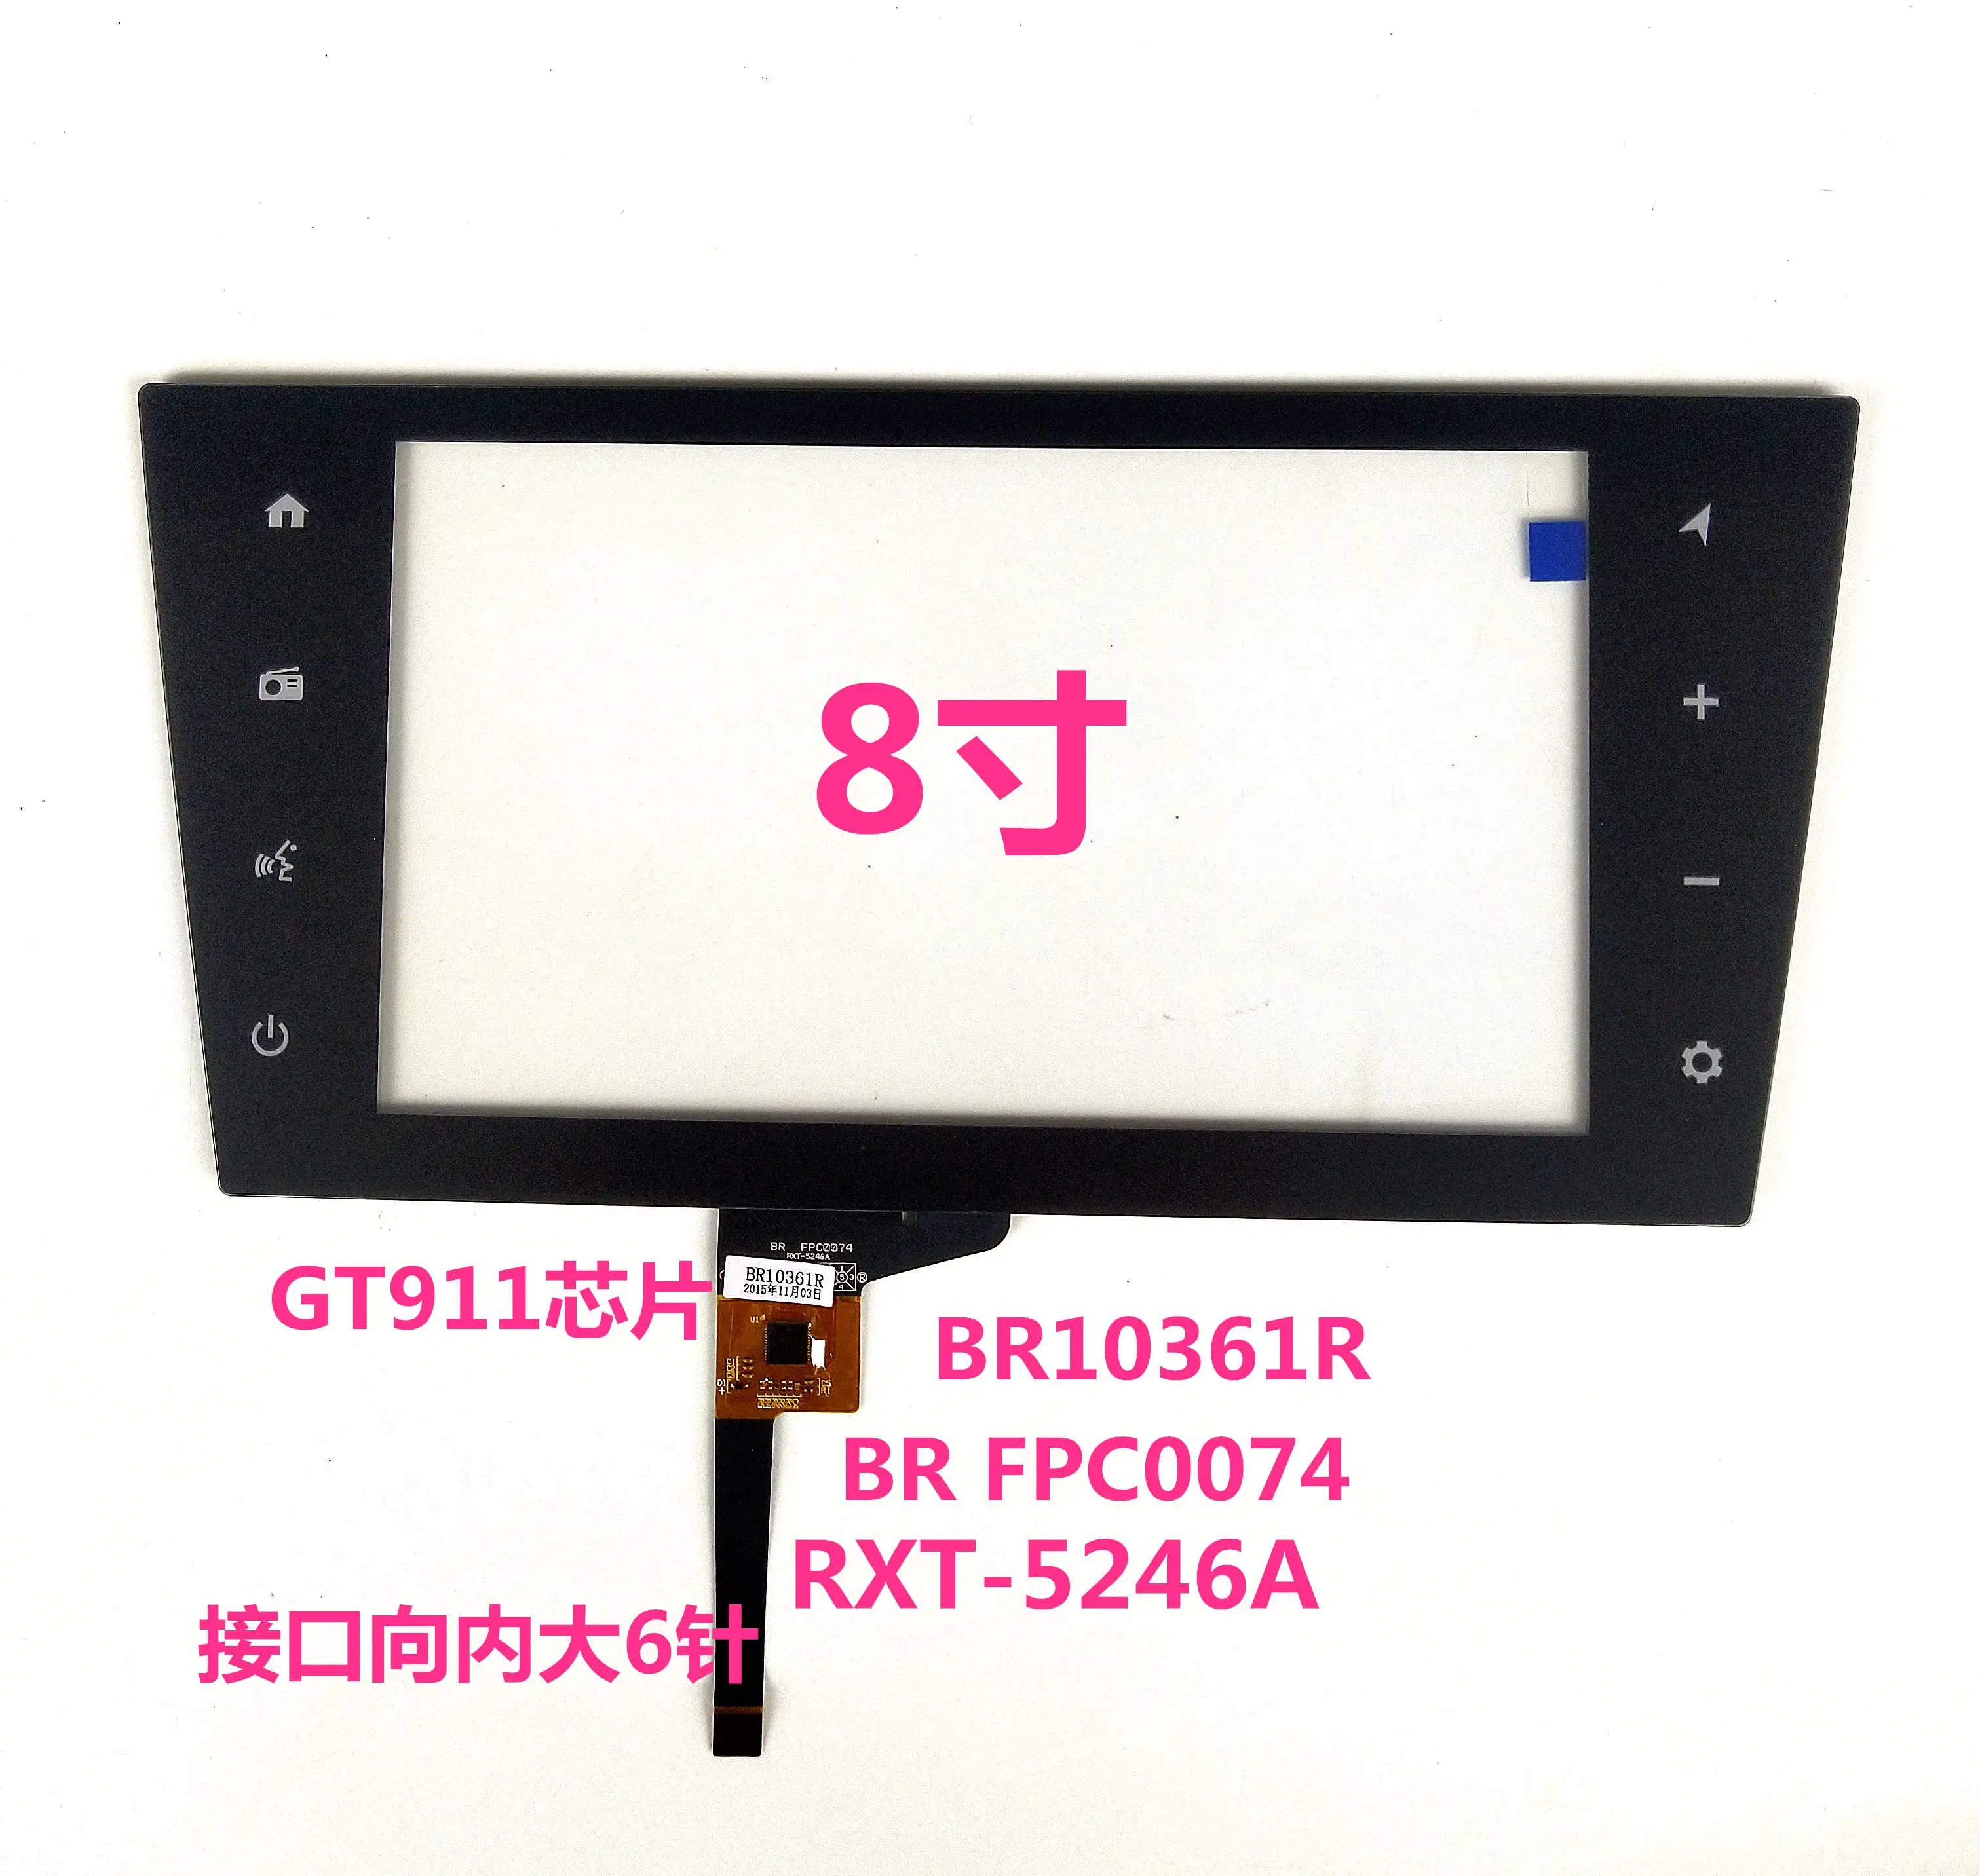 

Car DVD navigation 8 inch capacitive touch screen BR10361R-080 XJ584 BR FPC0074 RXT-5246A GT911 6 pin touch screen ribbon cable